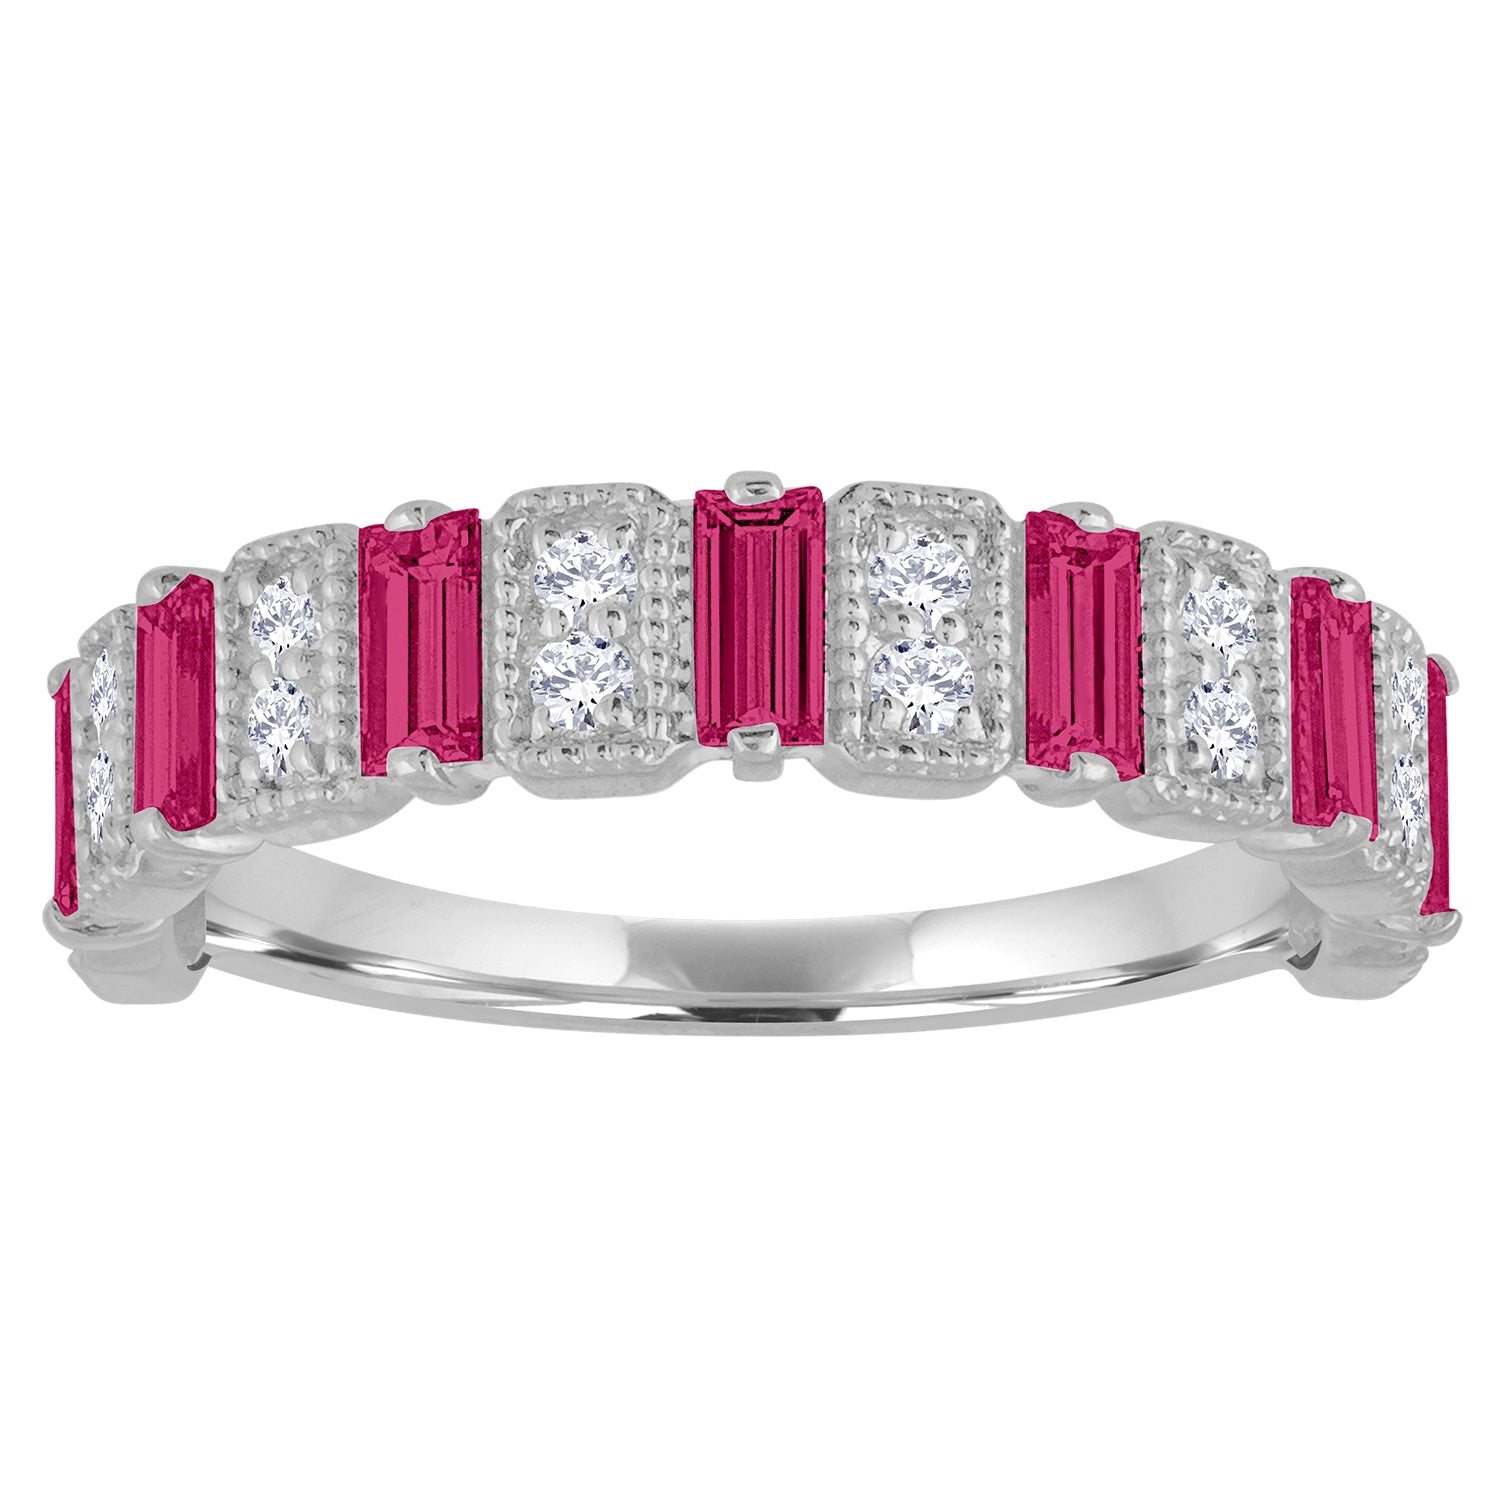 White gold wide band with ruby baguettes and round diamonds.